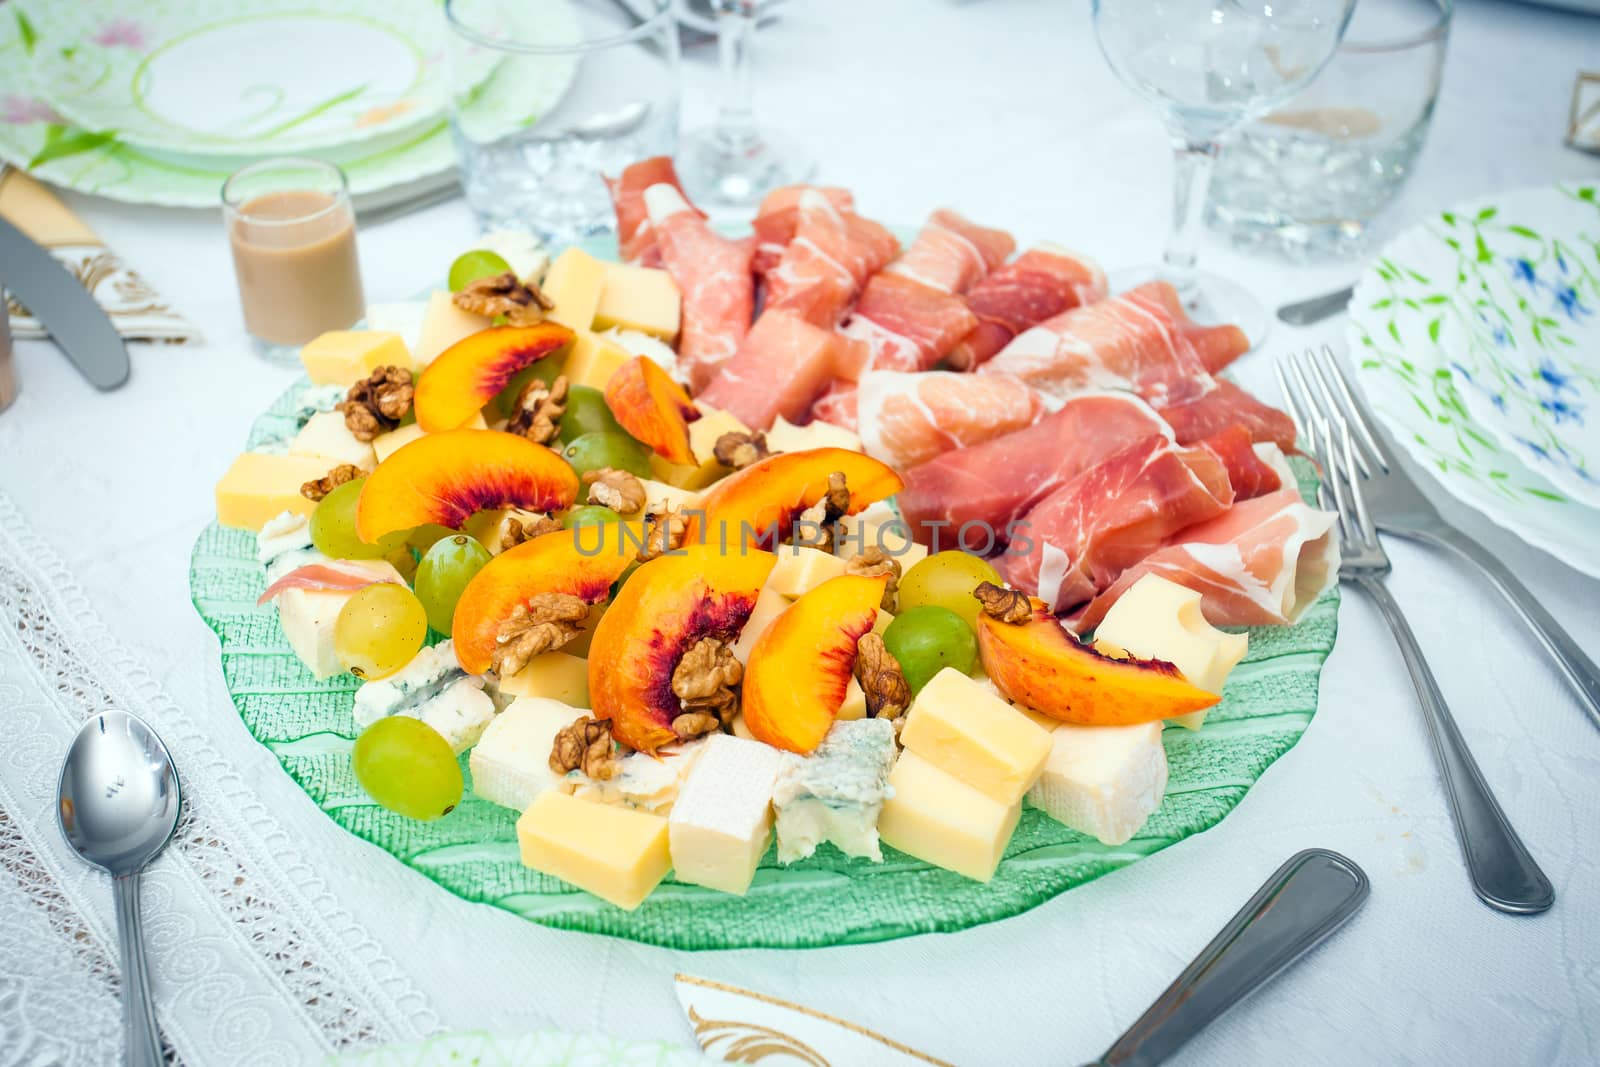 Cocktail food appetizer with ham rollspeaches, grapes, wallnuta and a variety os cheeses